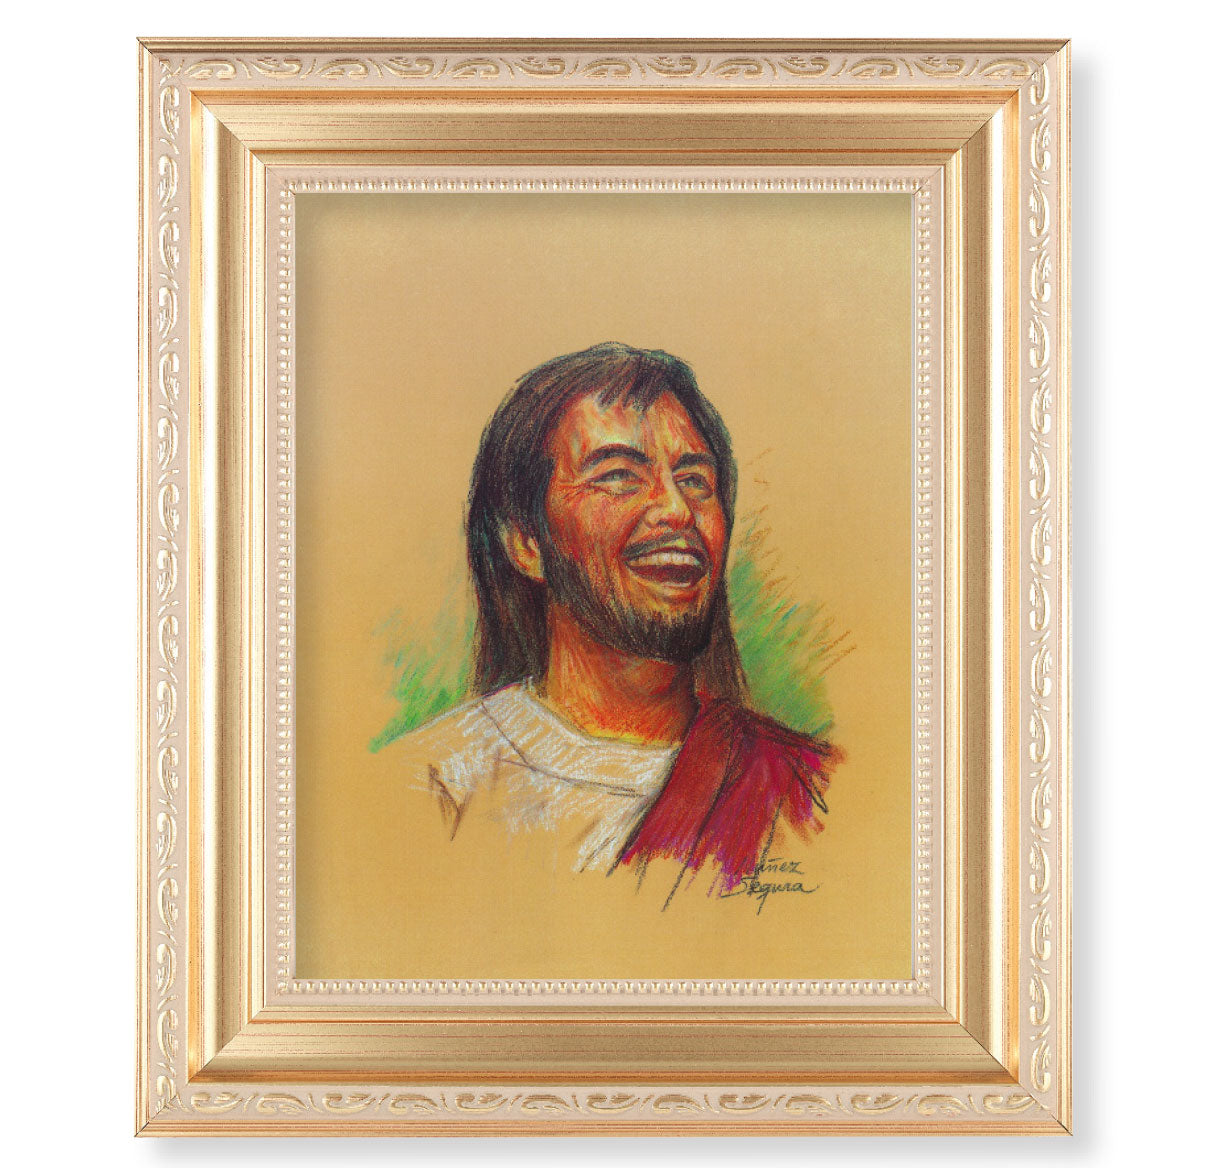 Laughing Jesus Picture Framed Wall Art Decor Large, Satin Gold Fluted Frame with Distressed Finish and Fine Detailed Scrollwork